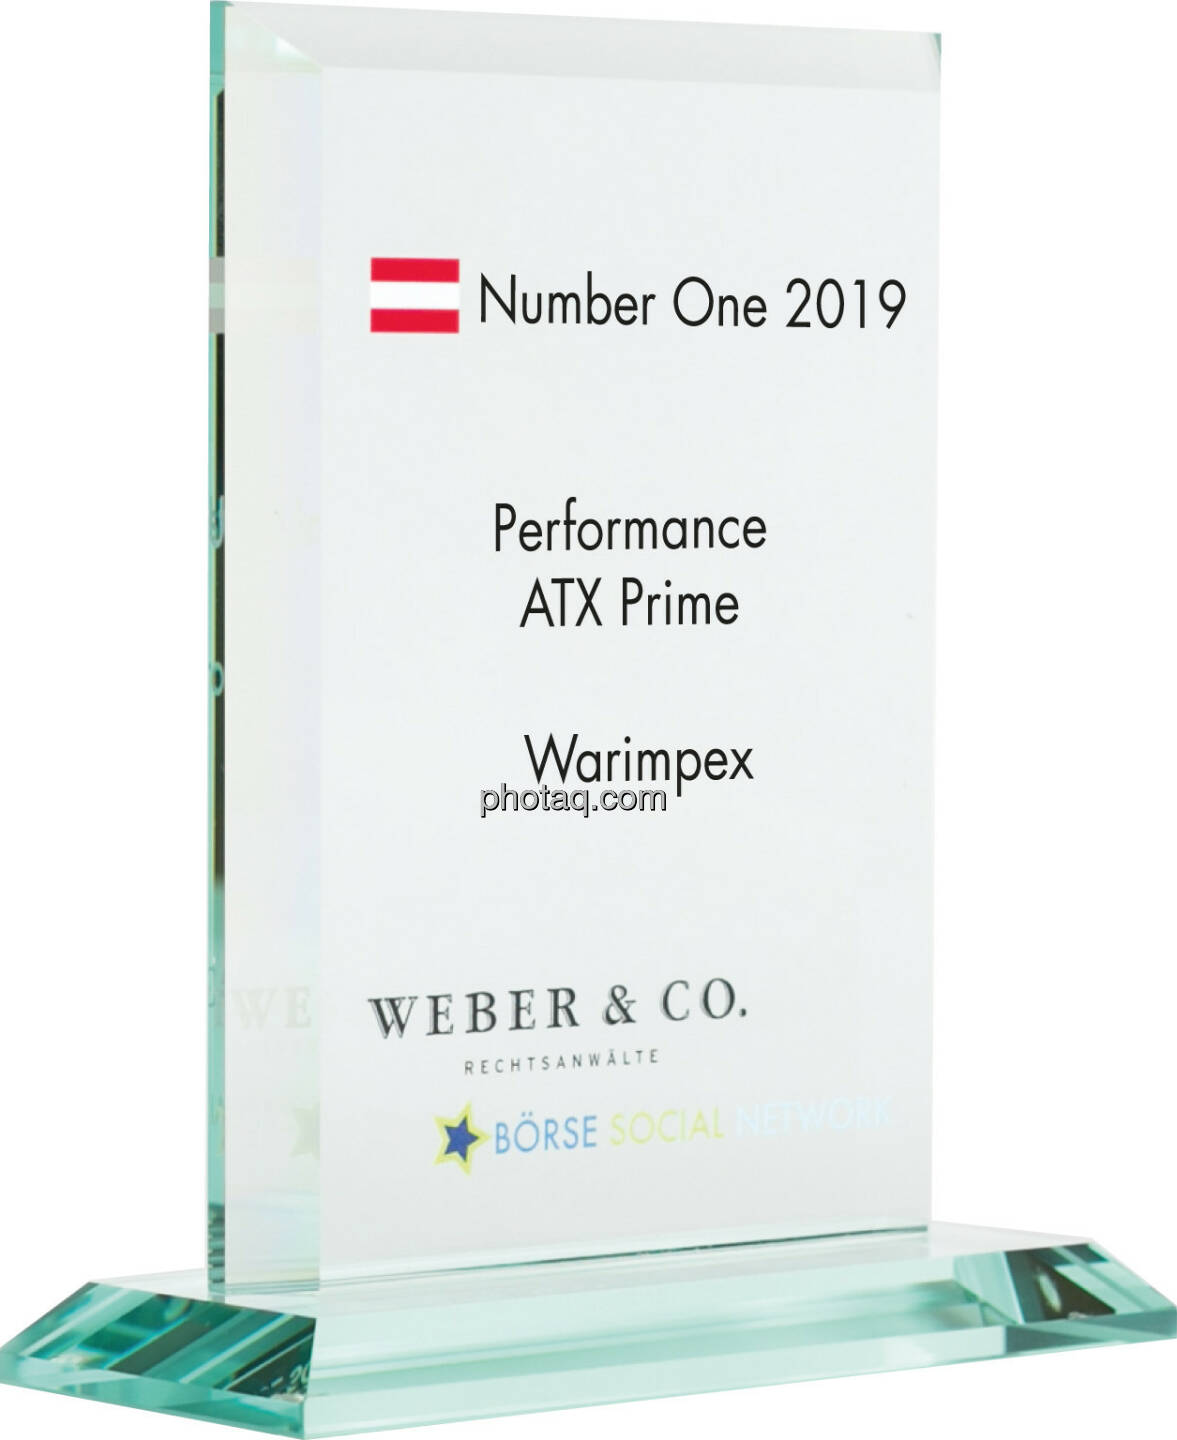 Number One Awards 2019 - Performance ATX Prime Warimpex